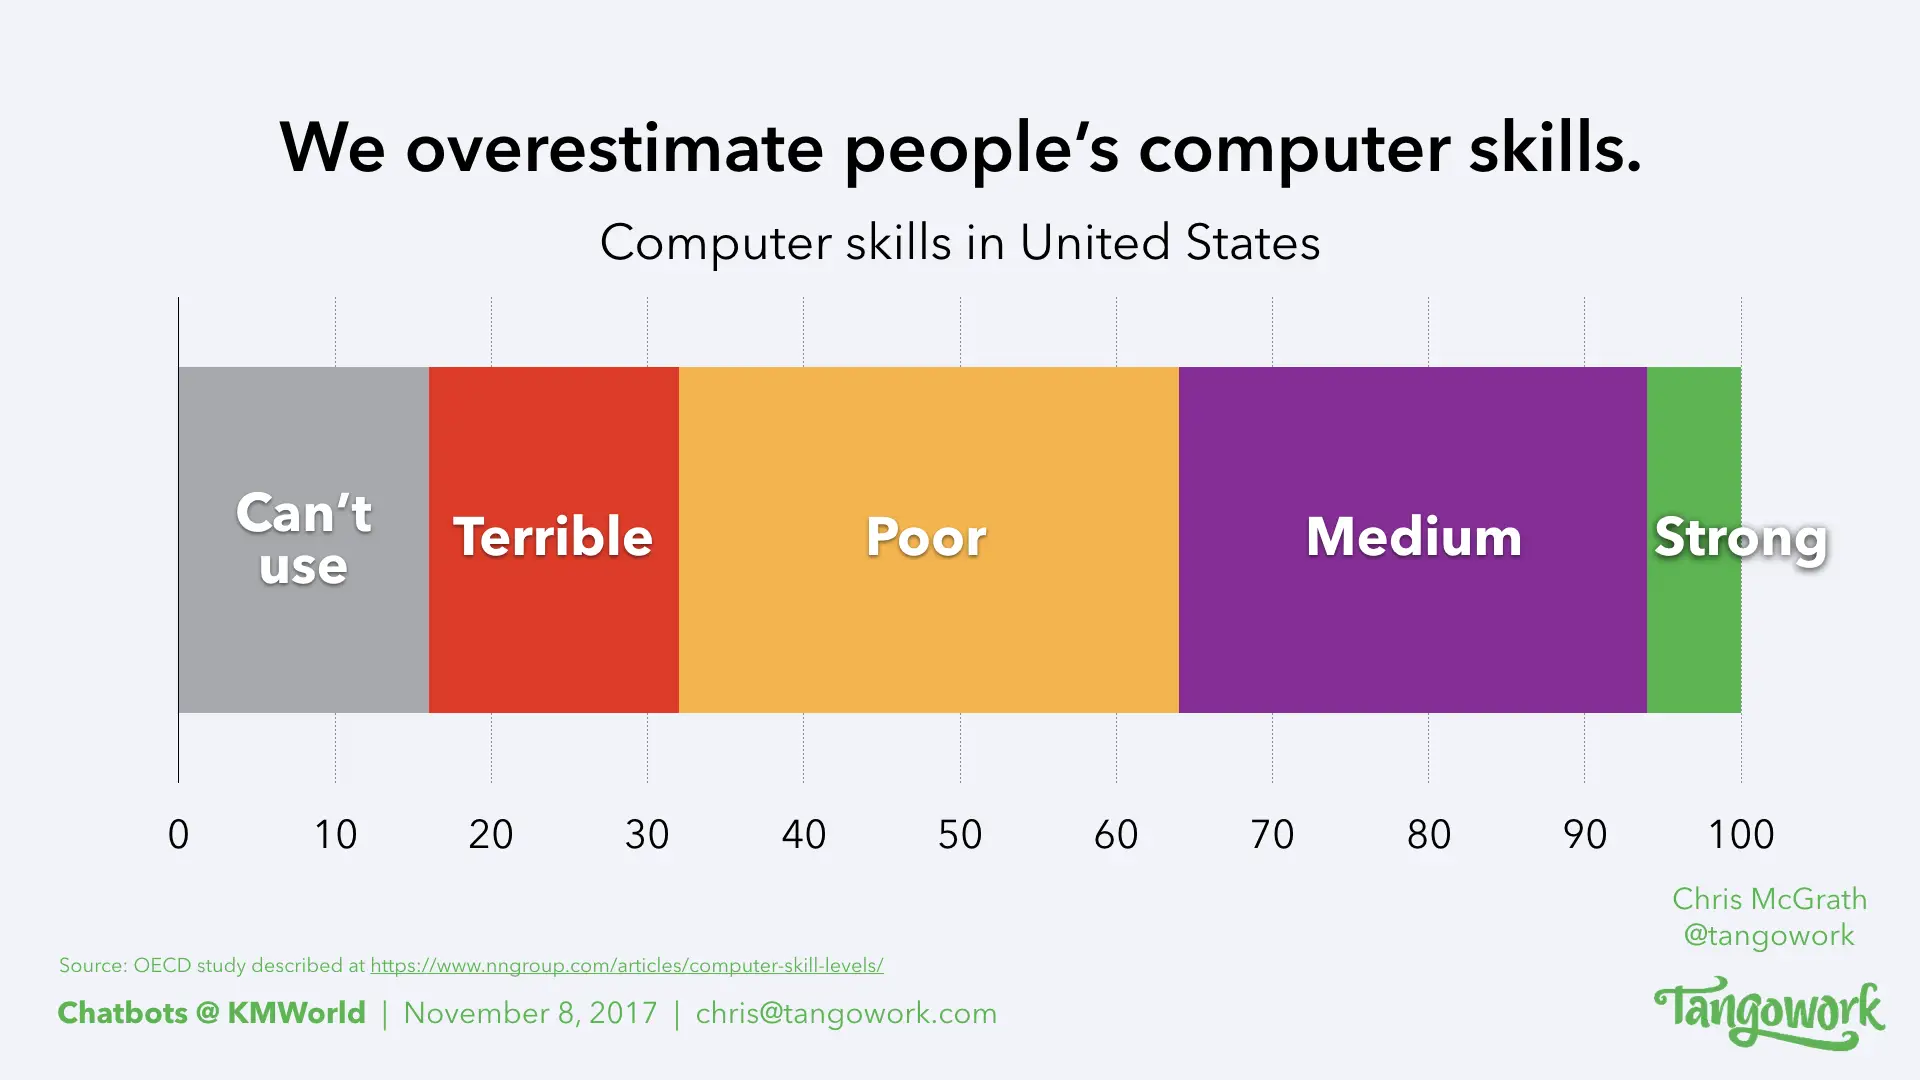 Chart showing how we overestimate people's computer skills